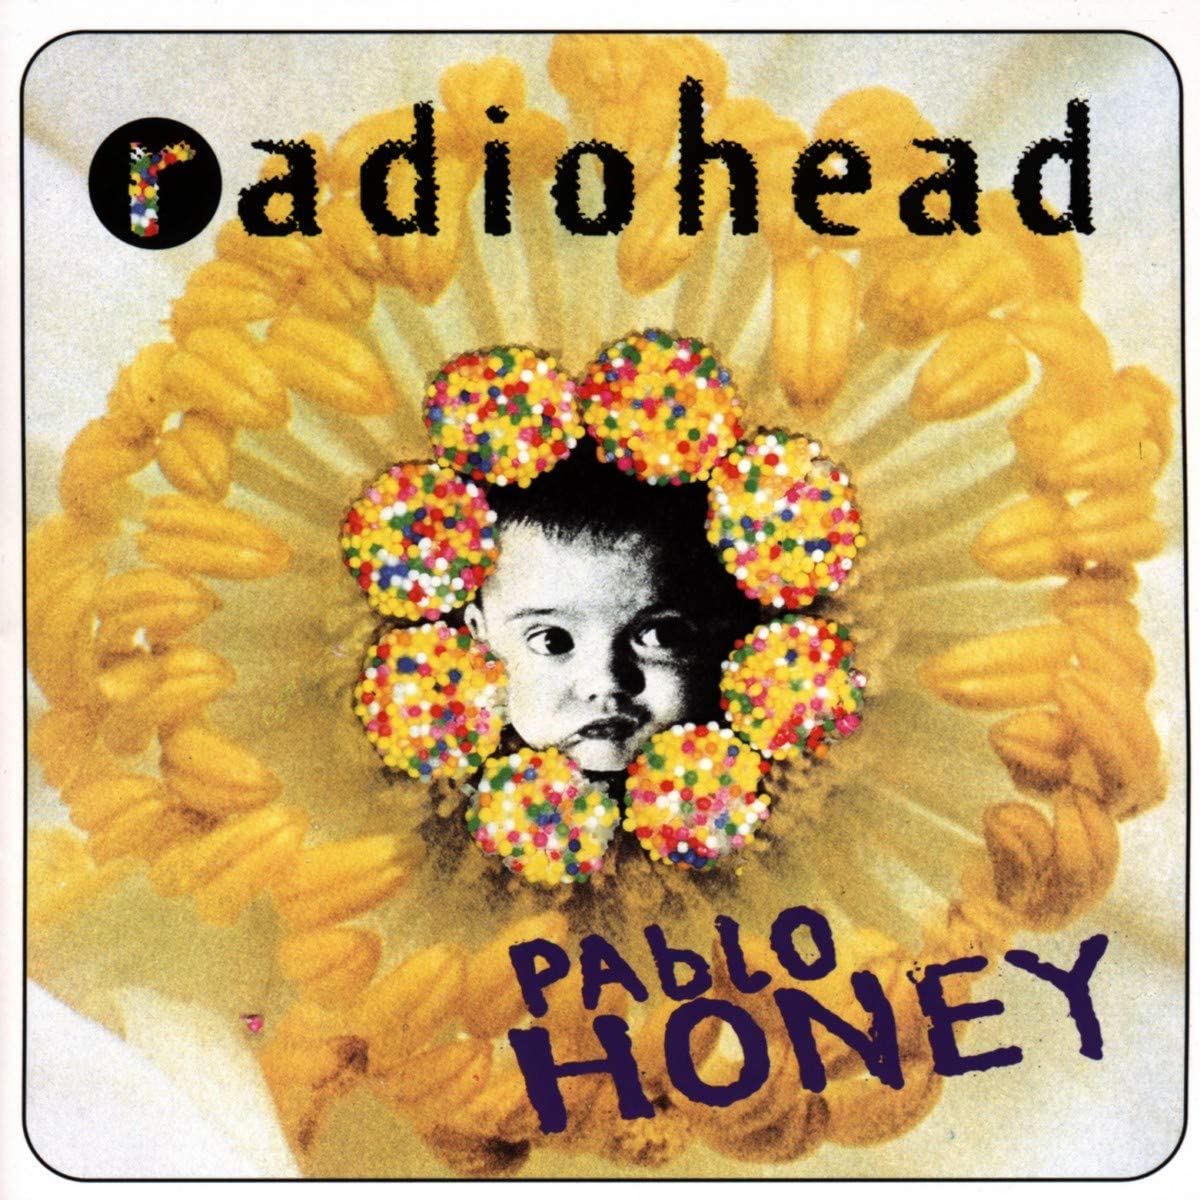 39. Creeplike most Radiohead fans, I have a love/hate relationship with this song. It's the band most famous tune and yet it doesn't represent. it does represent a youthful angst in a very cathartic way, and I can't really deny it's power